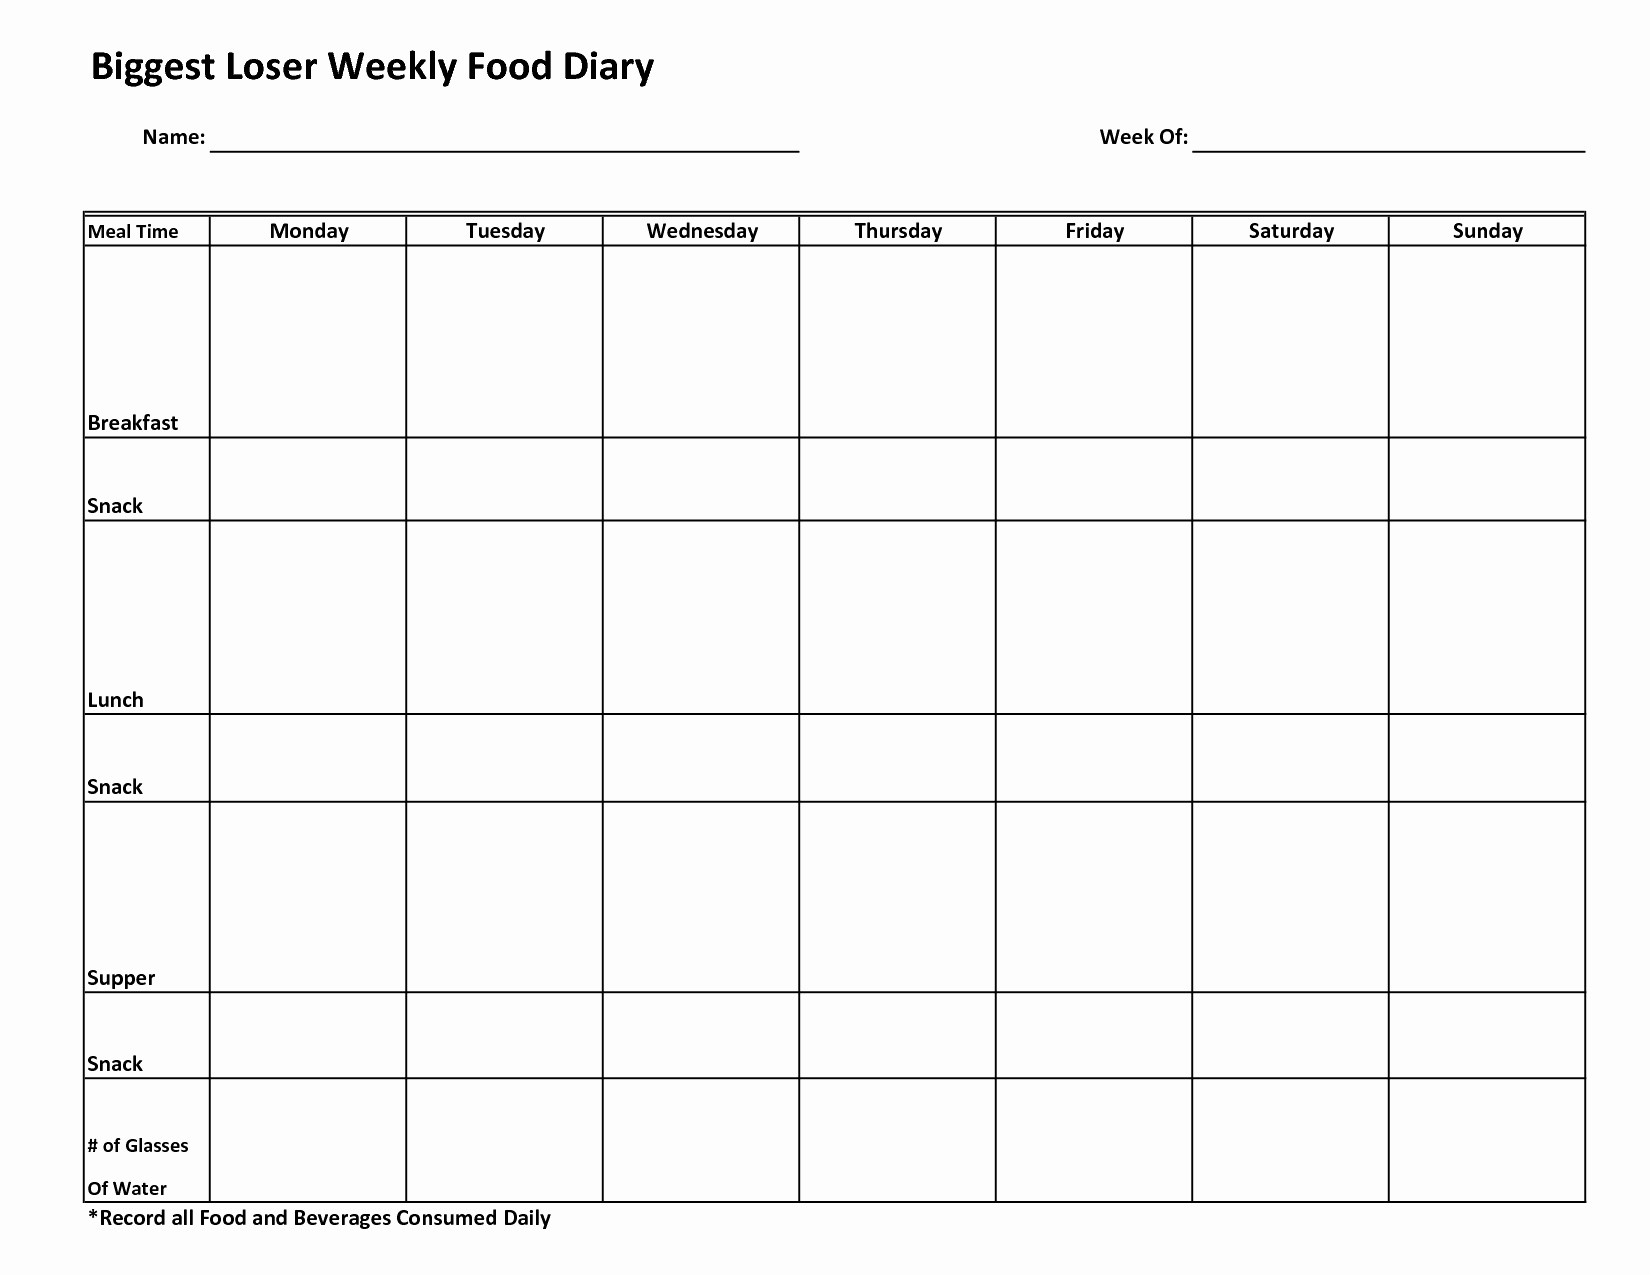 Biggest Loser Tracking Sheet Luxury Weight Loss Chart Document